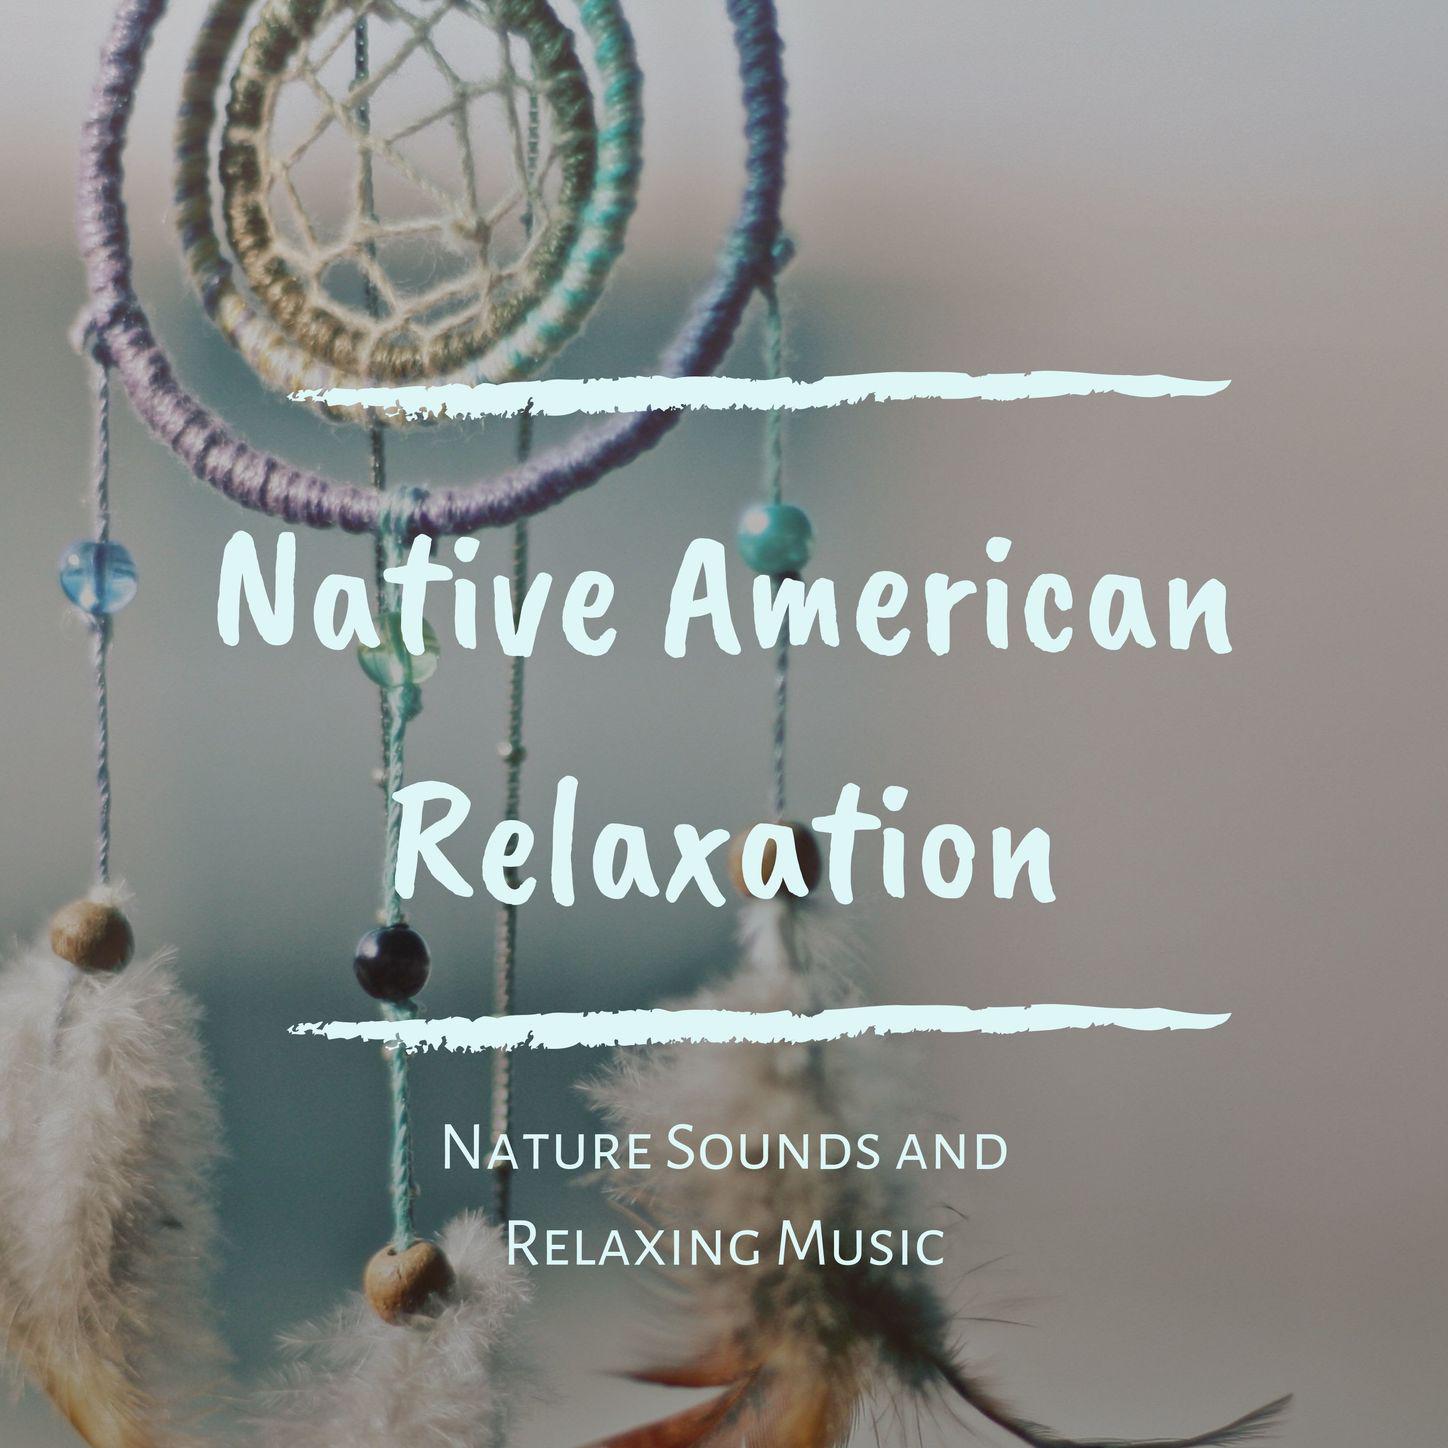 Native American Relaxation